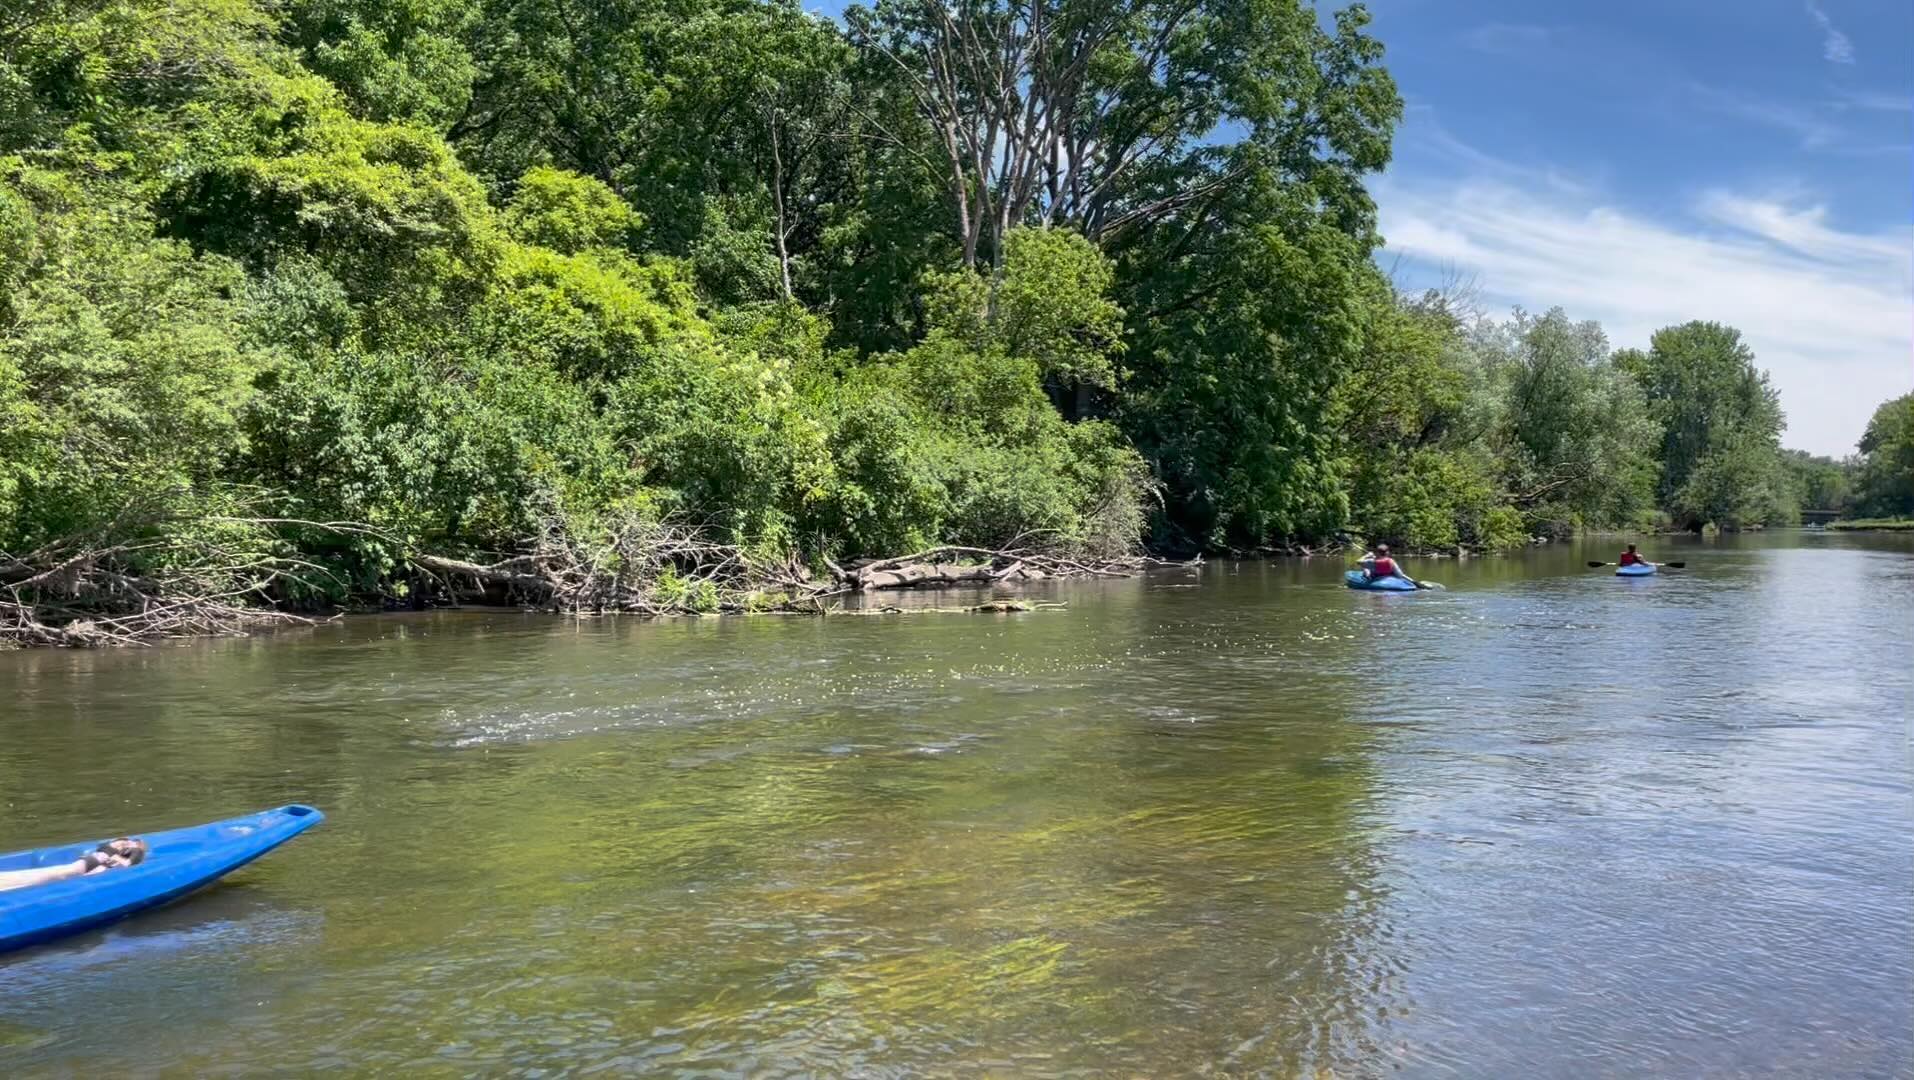 Nothing quite like the DuPage River in Naperville. Come kayak with us this weekend! Book now at www.napervillekayak.com.